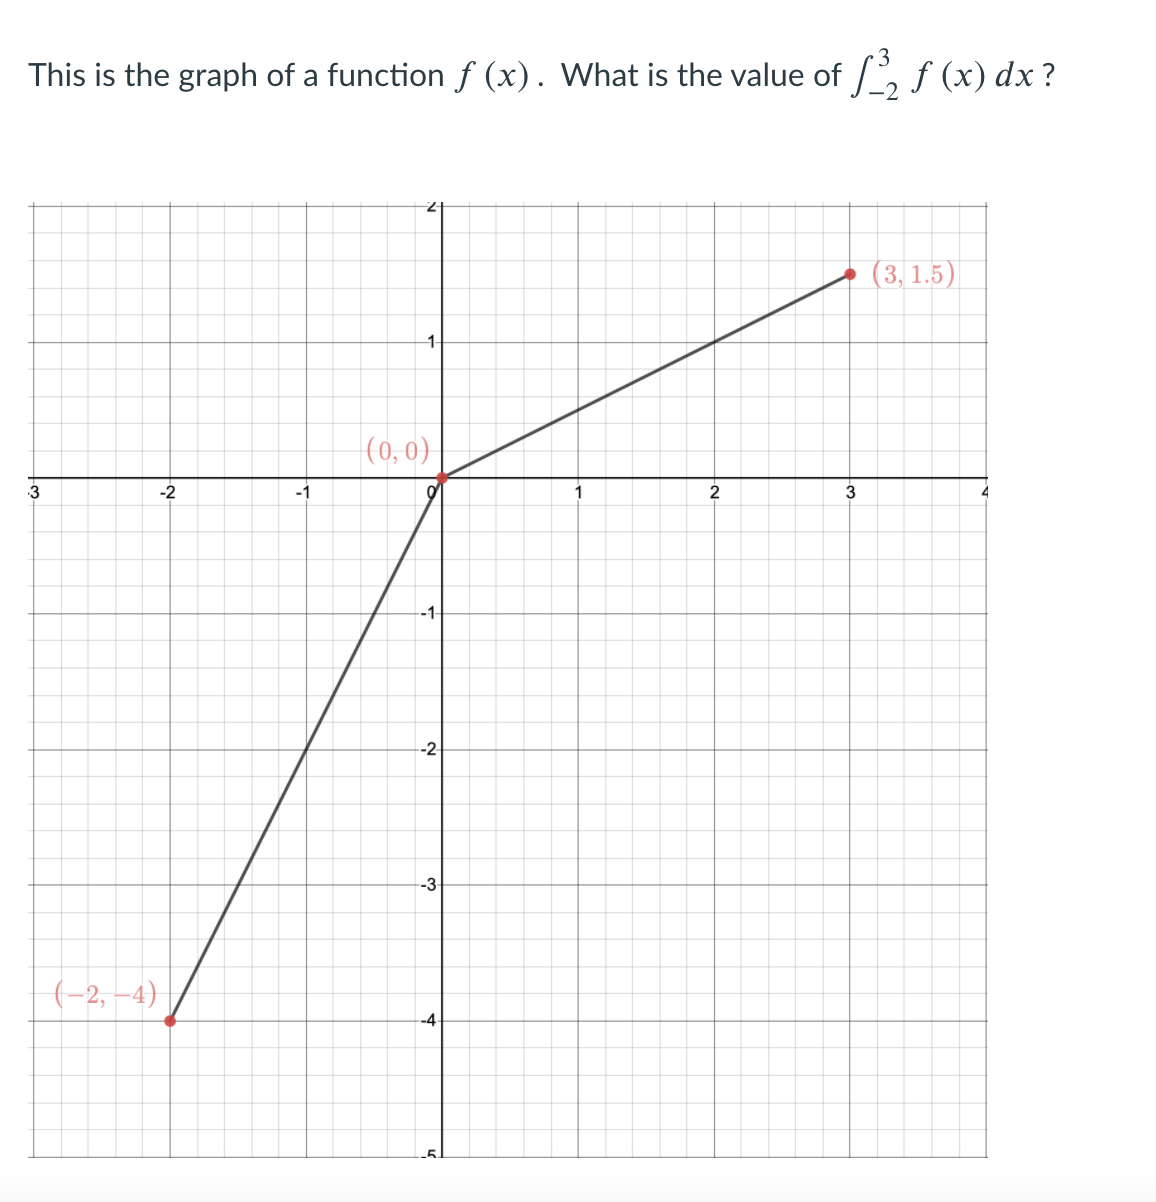 This is the graph of a function ƒ (x). What is the value of /, ƒ (x) dx?
(3, 1.5)
1
(0, 0)
3
-2
-1
2
3
-1
-2
-3
(-2, –4)
-4
